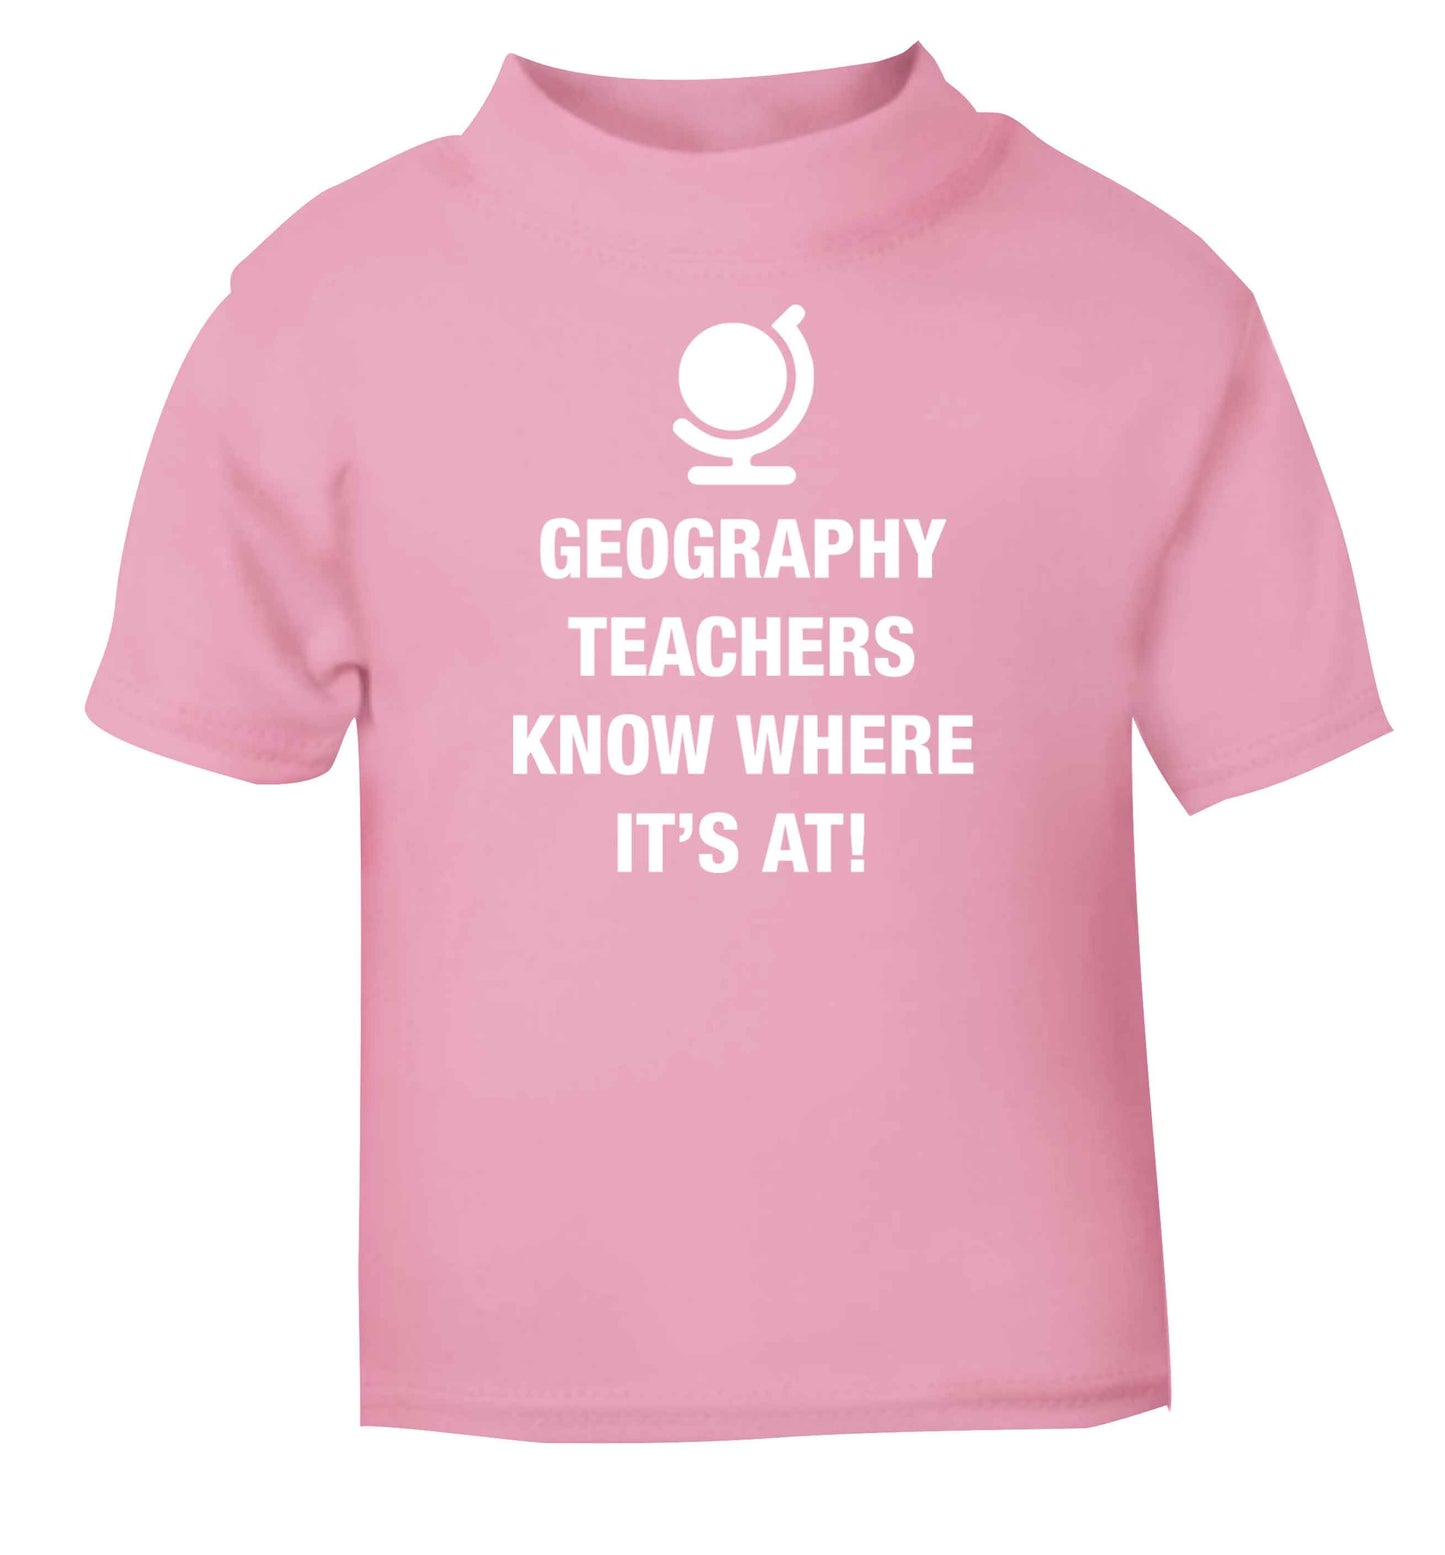 Geography teachers know where it's at light pink baby toddler Tshirt 2 Years